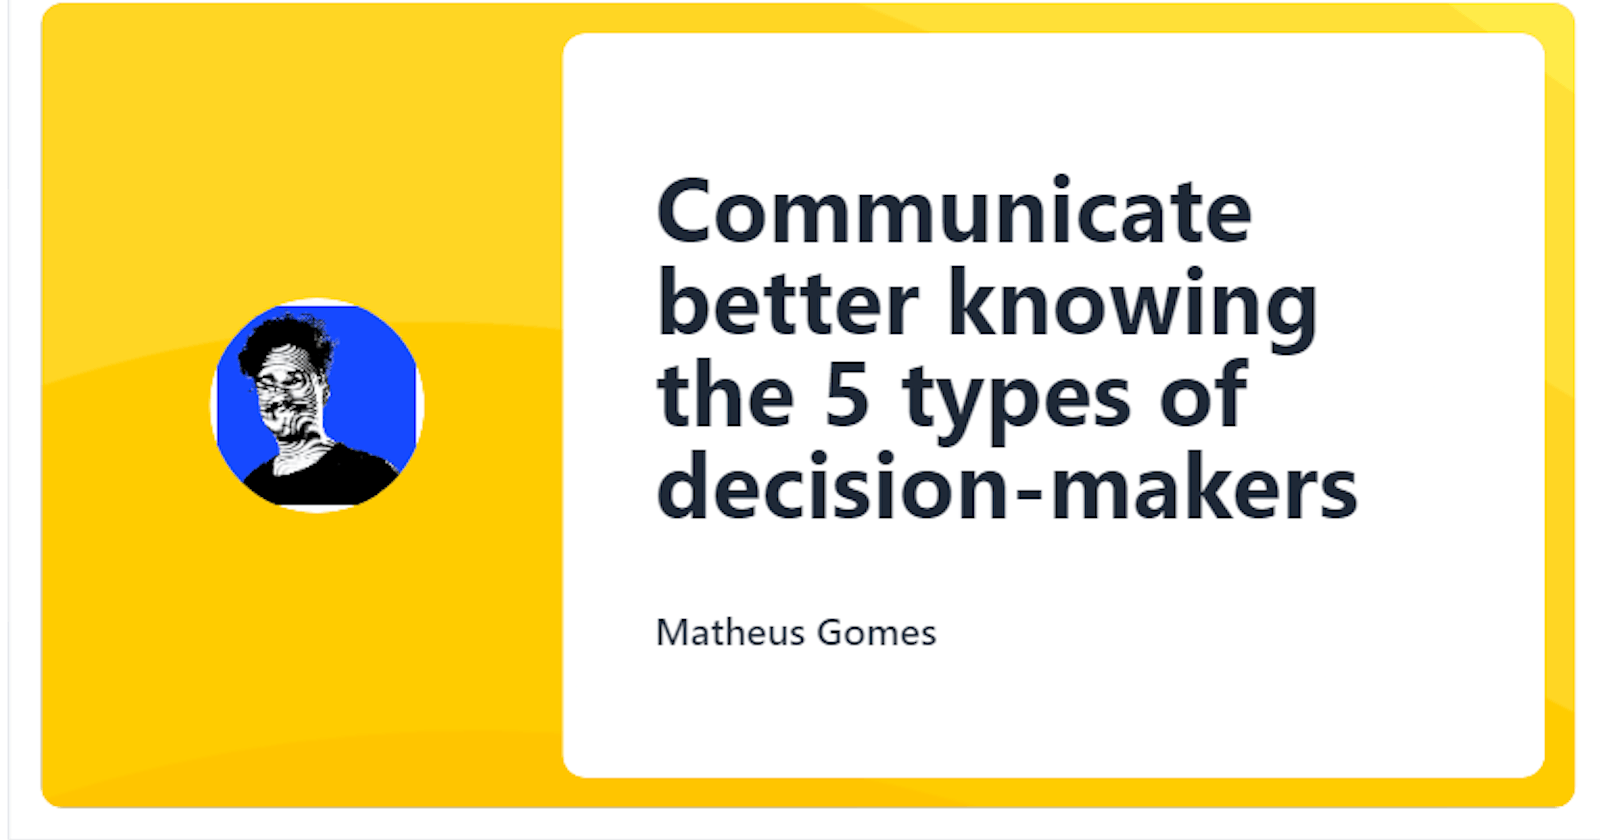 5 types of decision-makers